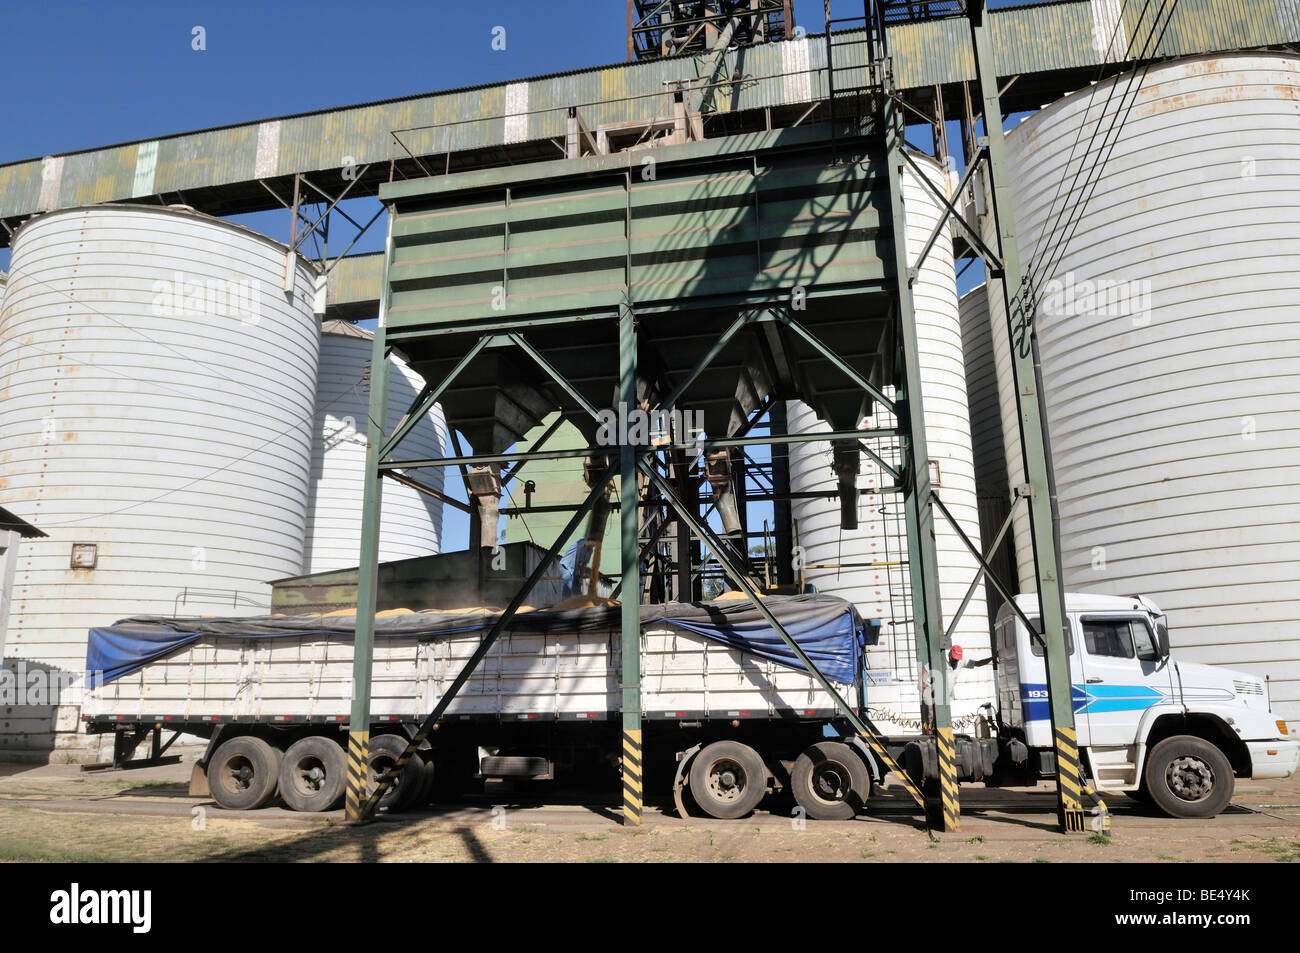 Loading a truck with soy or maize, Uberlandia, Minas Gerais, Brazil, South America Stock Photo